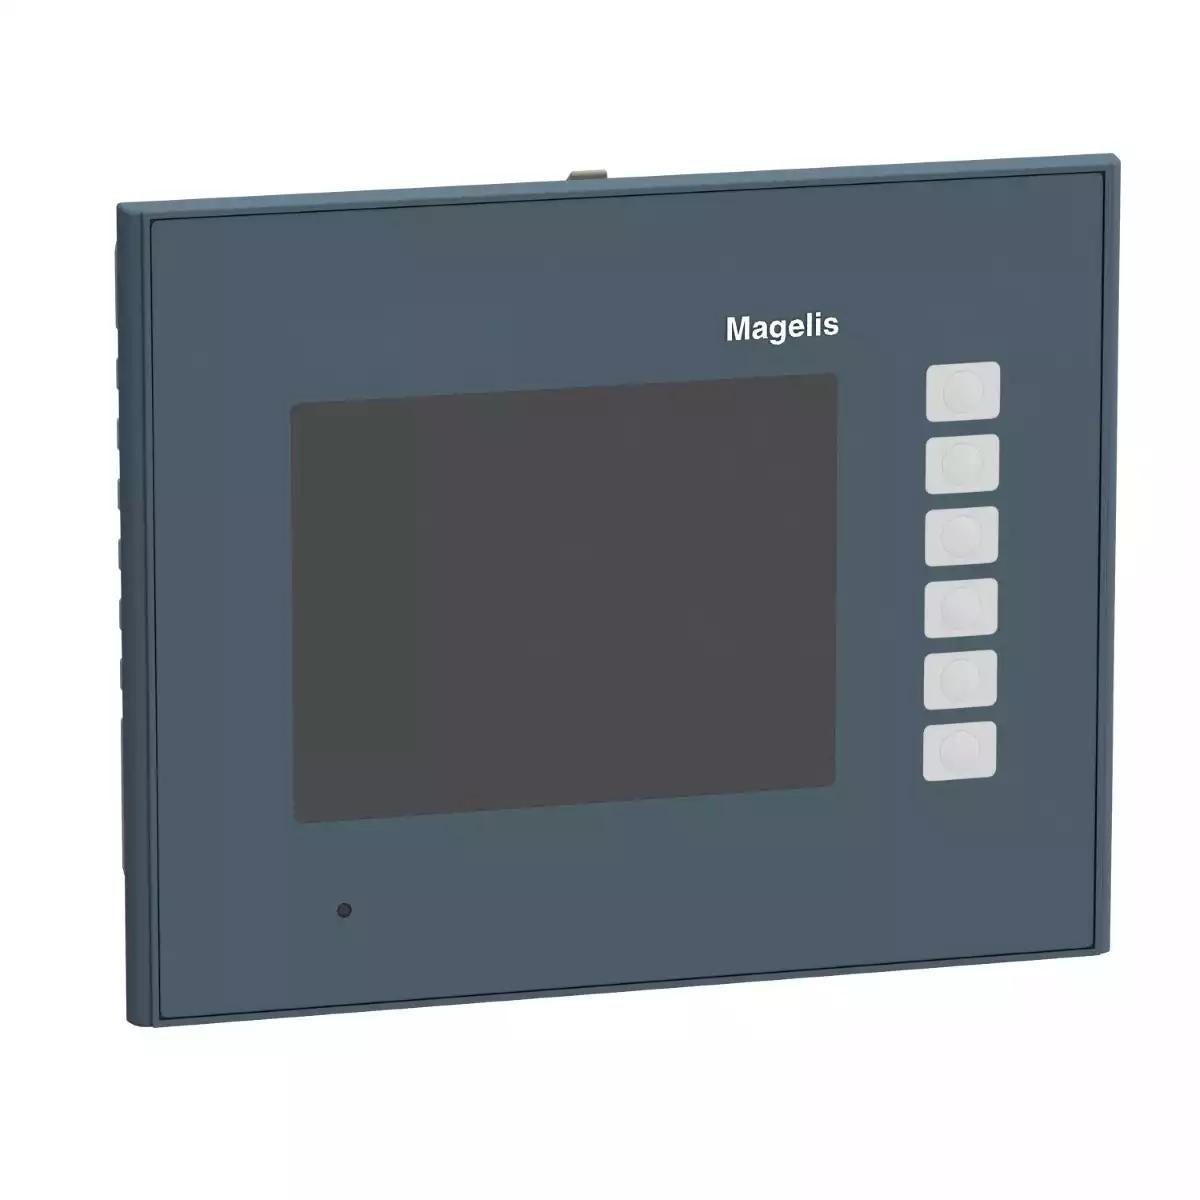 Advanced touchscreen panel, Harmony GTO, 3.5 Color Touch QVGA TFT, logo removed